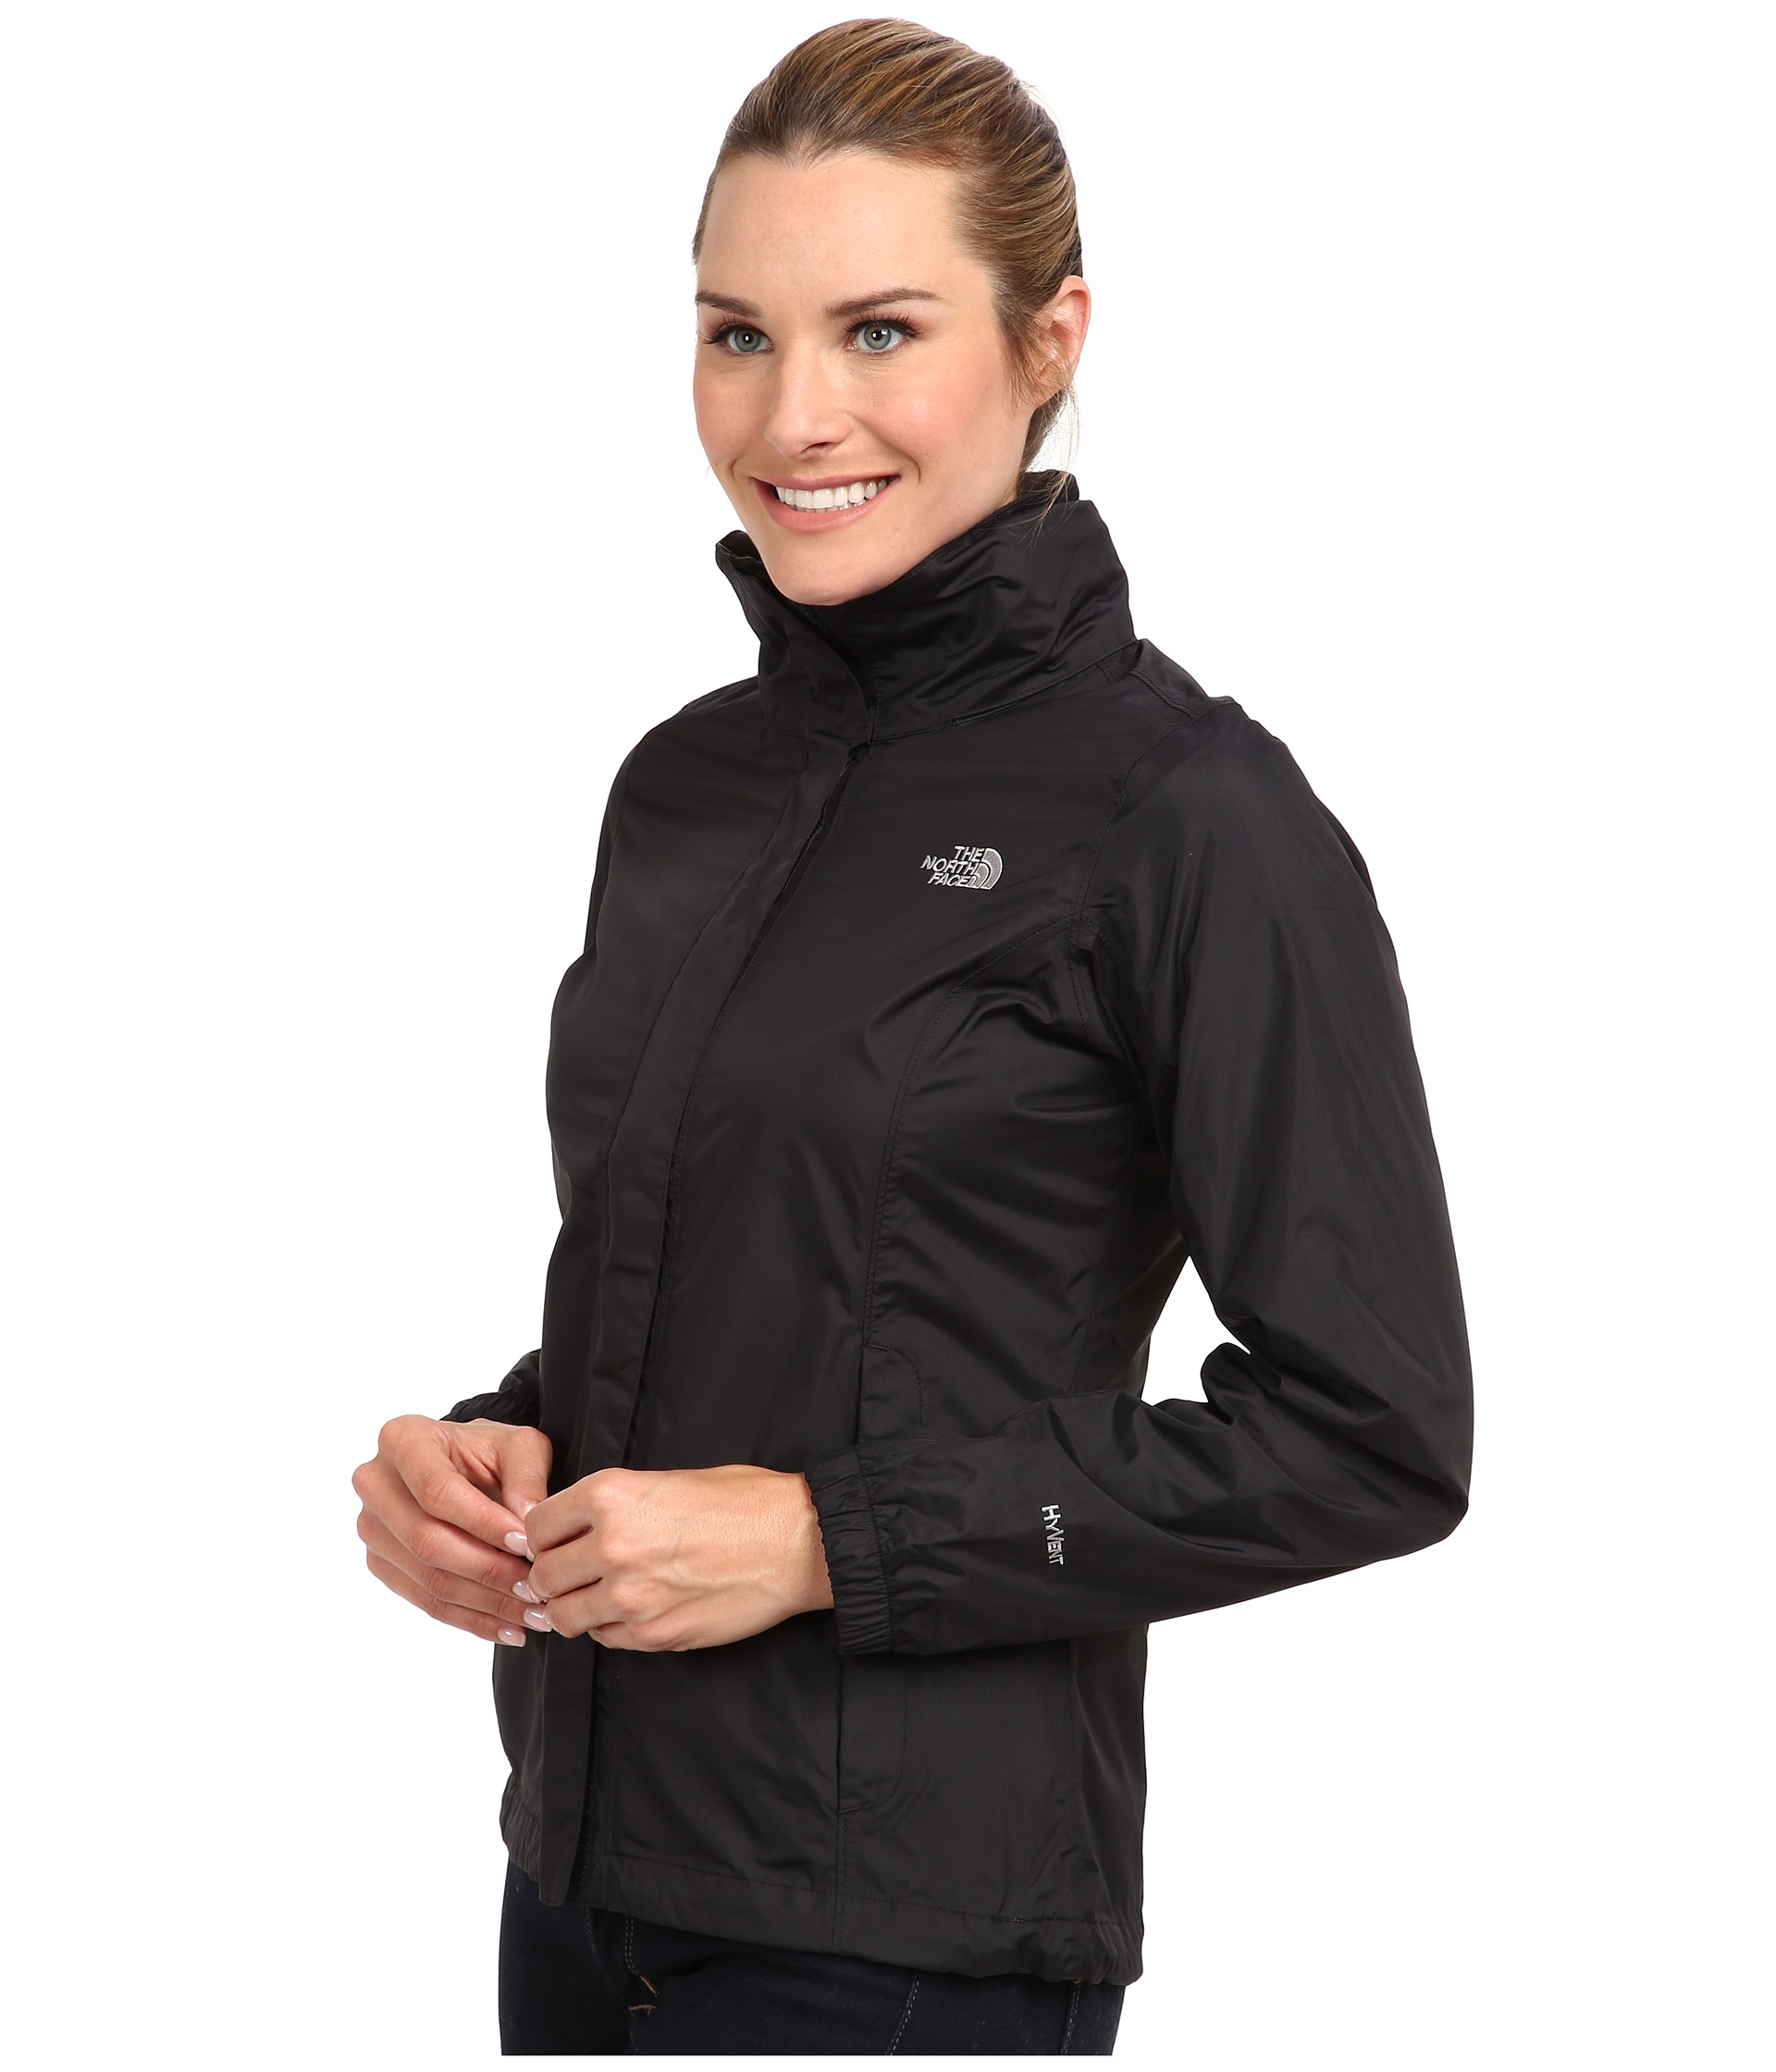 The North Face Resolve Jacket at Zappos.com